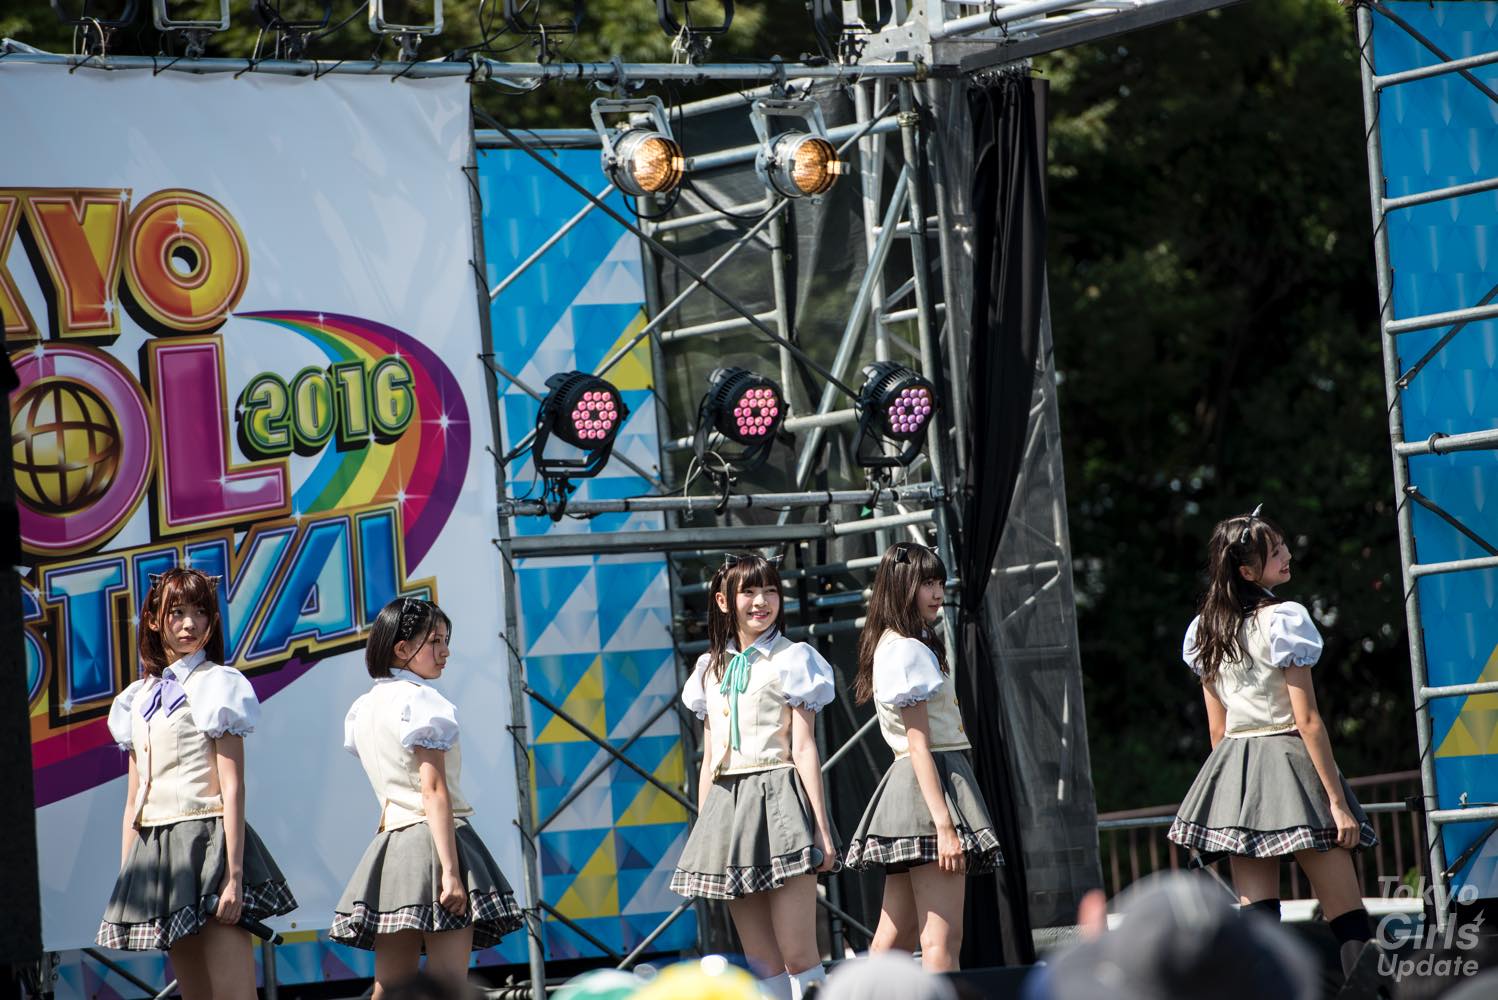 Tokyo Girls’ Update Sets Sail For Adventure at Tokyo Idol Festival 2016’s Ship Stage!